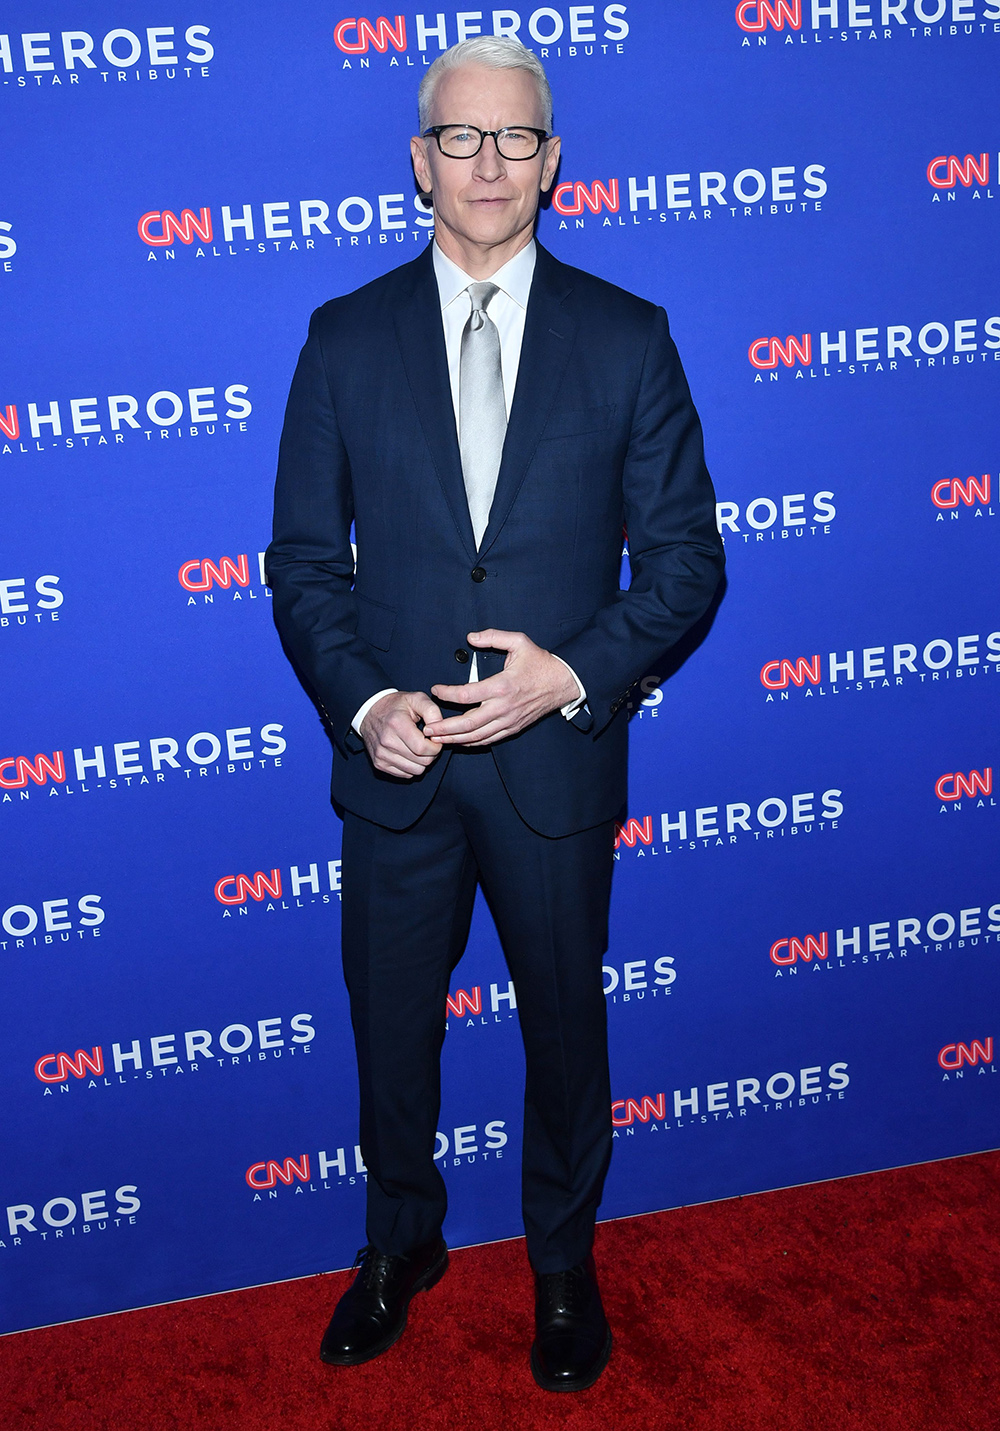 Anderson Cooper was classic during the 2022 CNN Heroes All-Star Tribute. He looked sharp in his navy suit and silver tie.